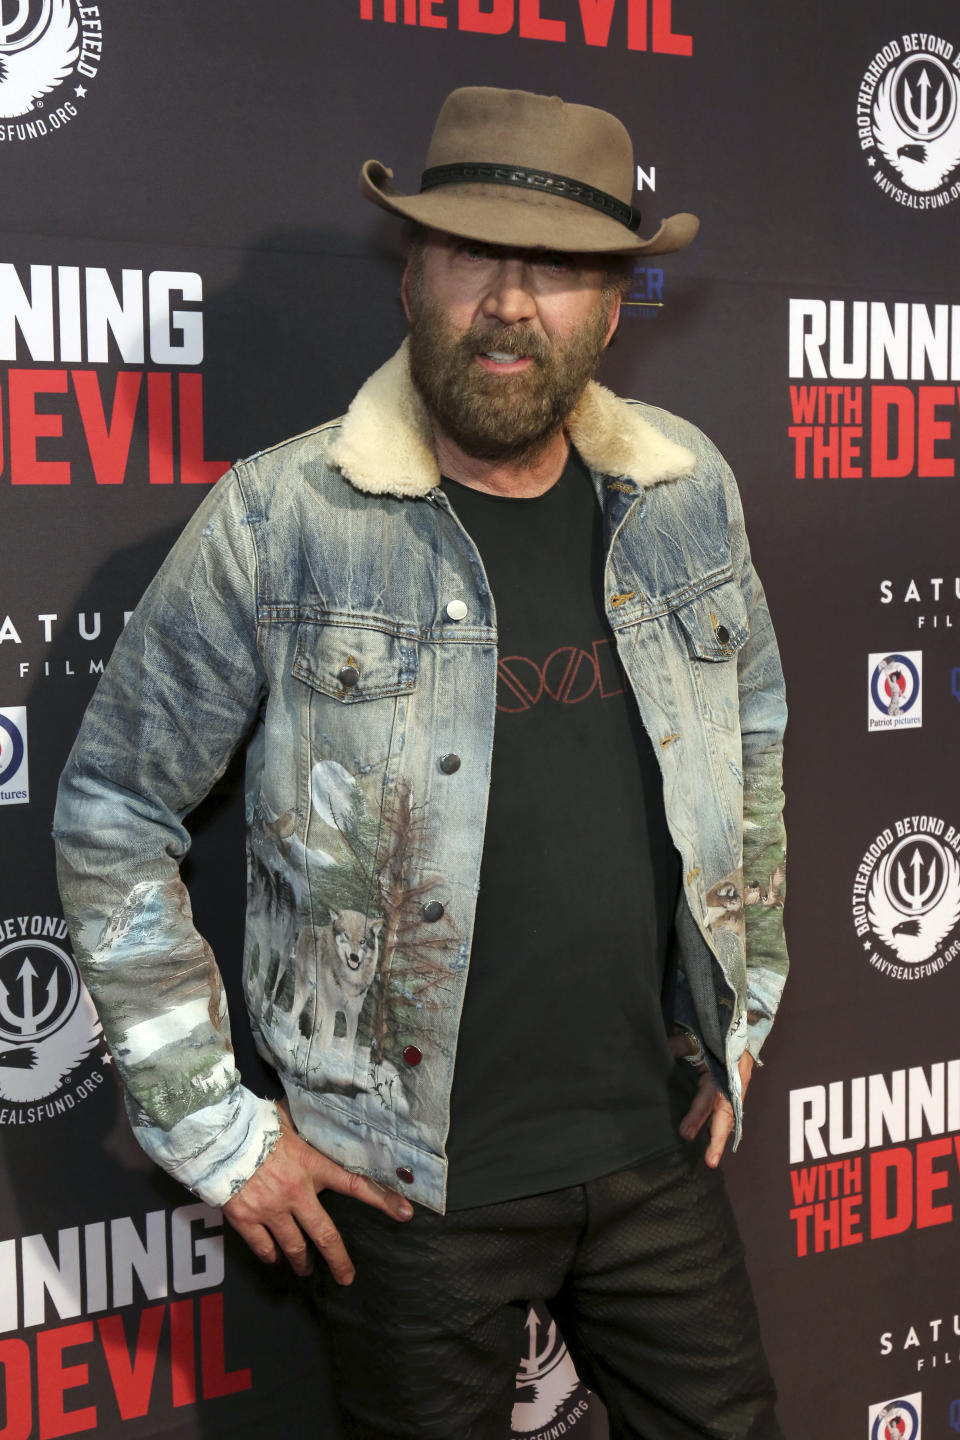 Nicolas Cage attends the LA Premiere of "Running with the Devil," at the Writers Guild Theater, Monday, Sept. 16, 2019, in Beverly Hills, Calif. (Photo by Willy Sanjuan/Invision/AP)